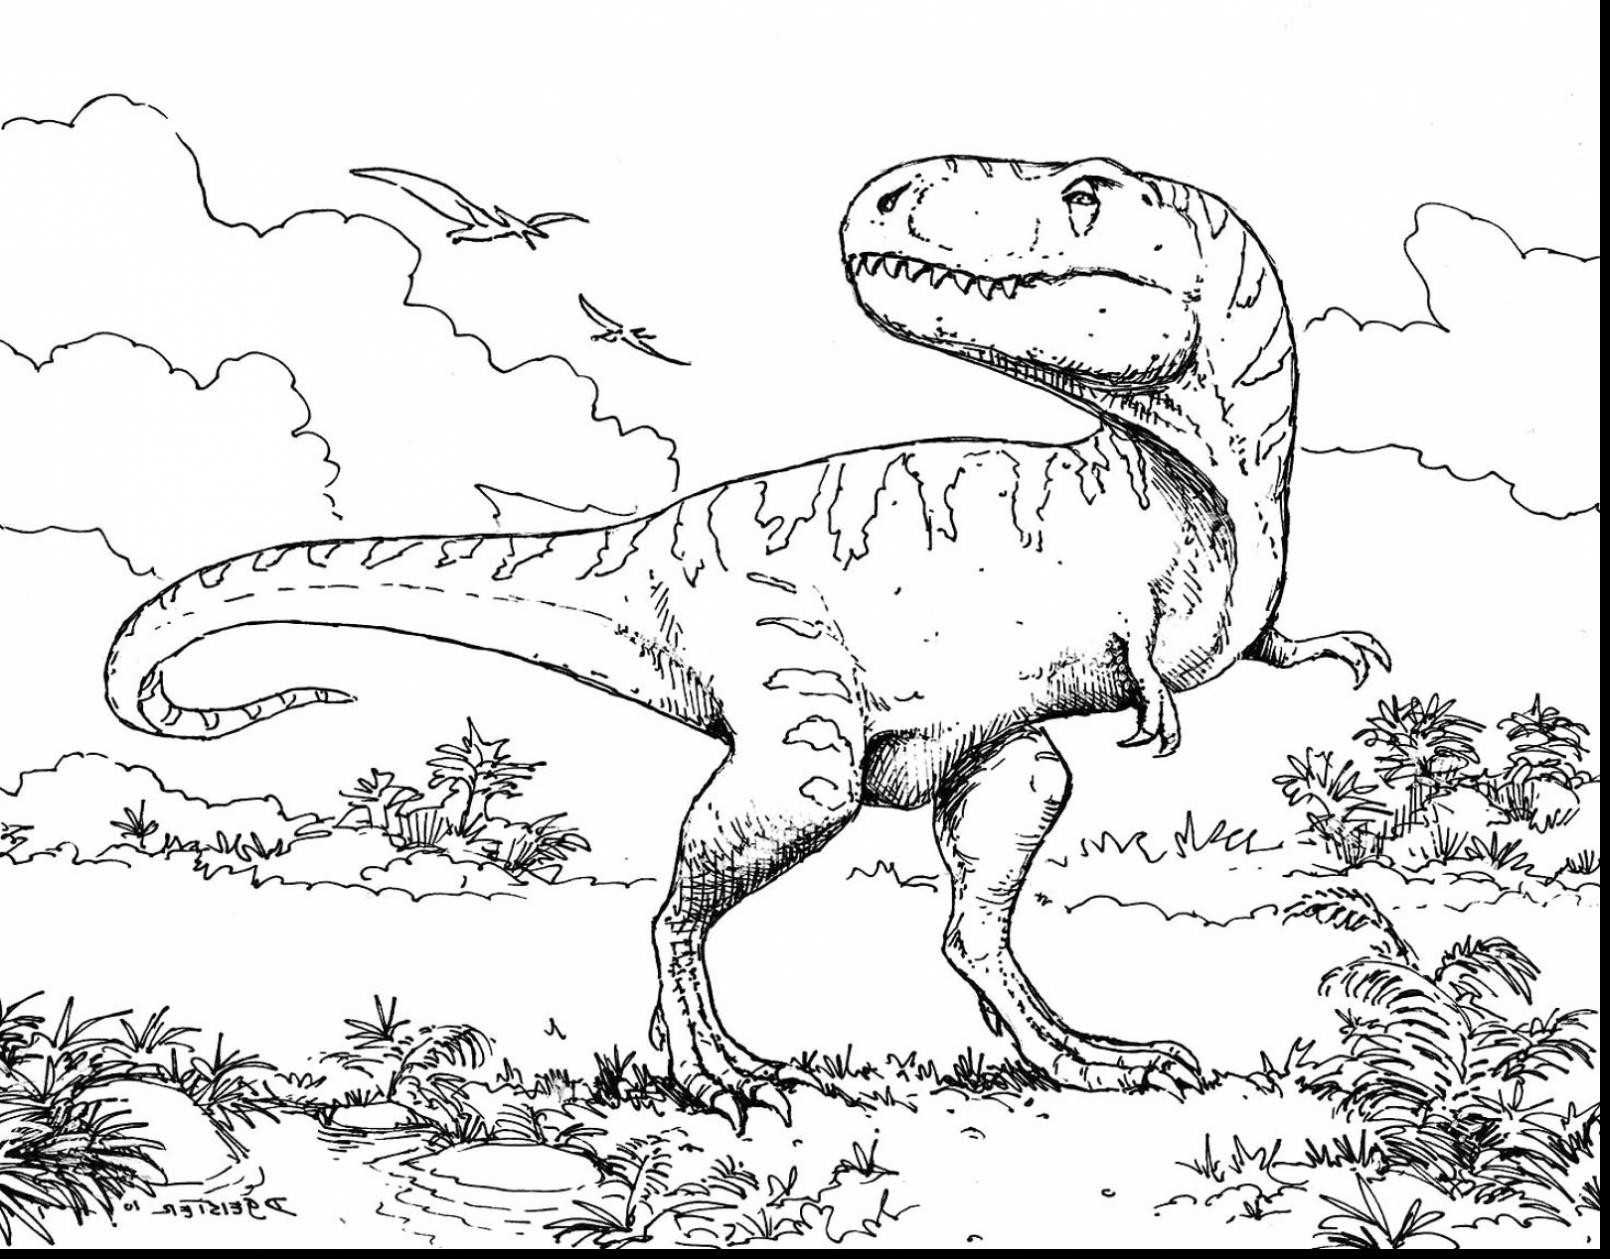 t-rex-coloring-pages-to-print-of-t-rex-coloring-pages-to-print T Rex Coloring Pages to Print Dinosaurs 